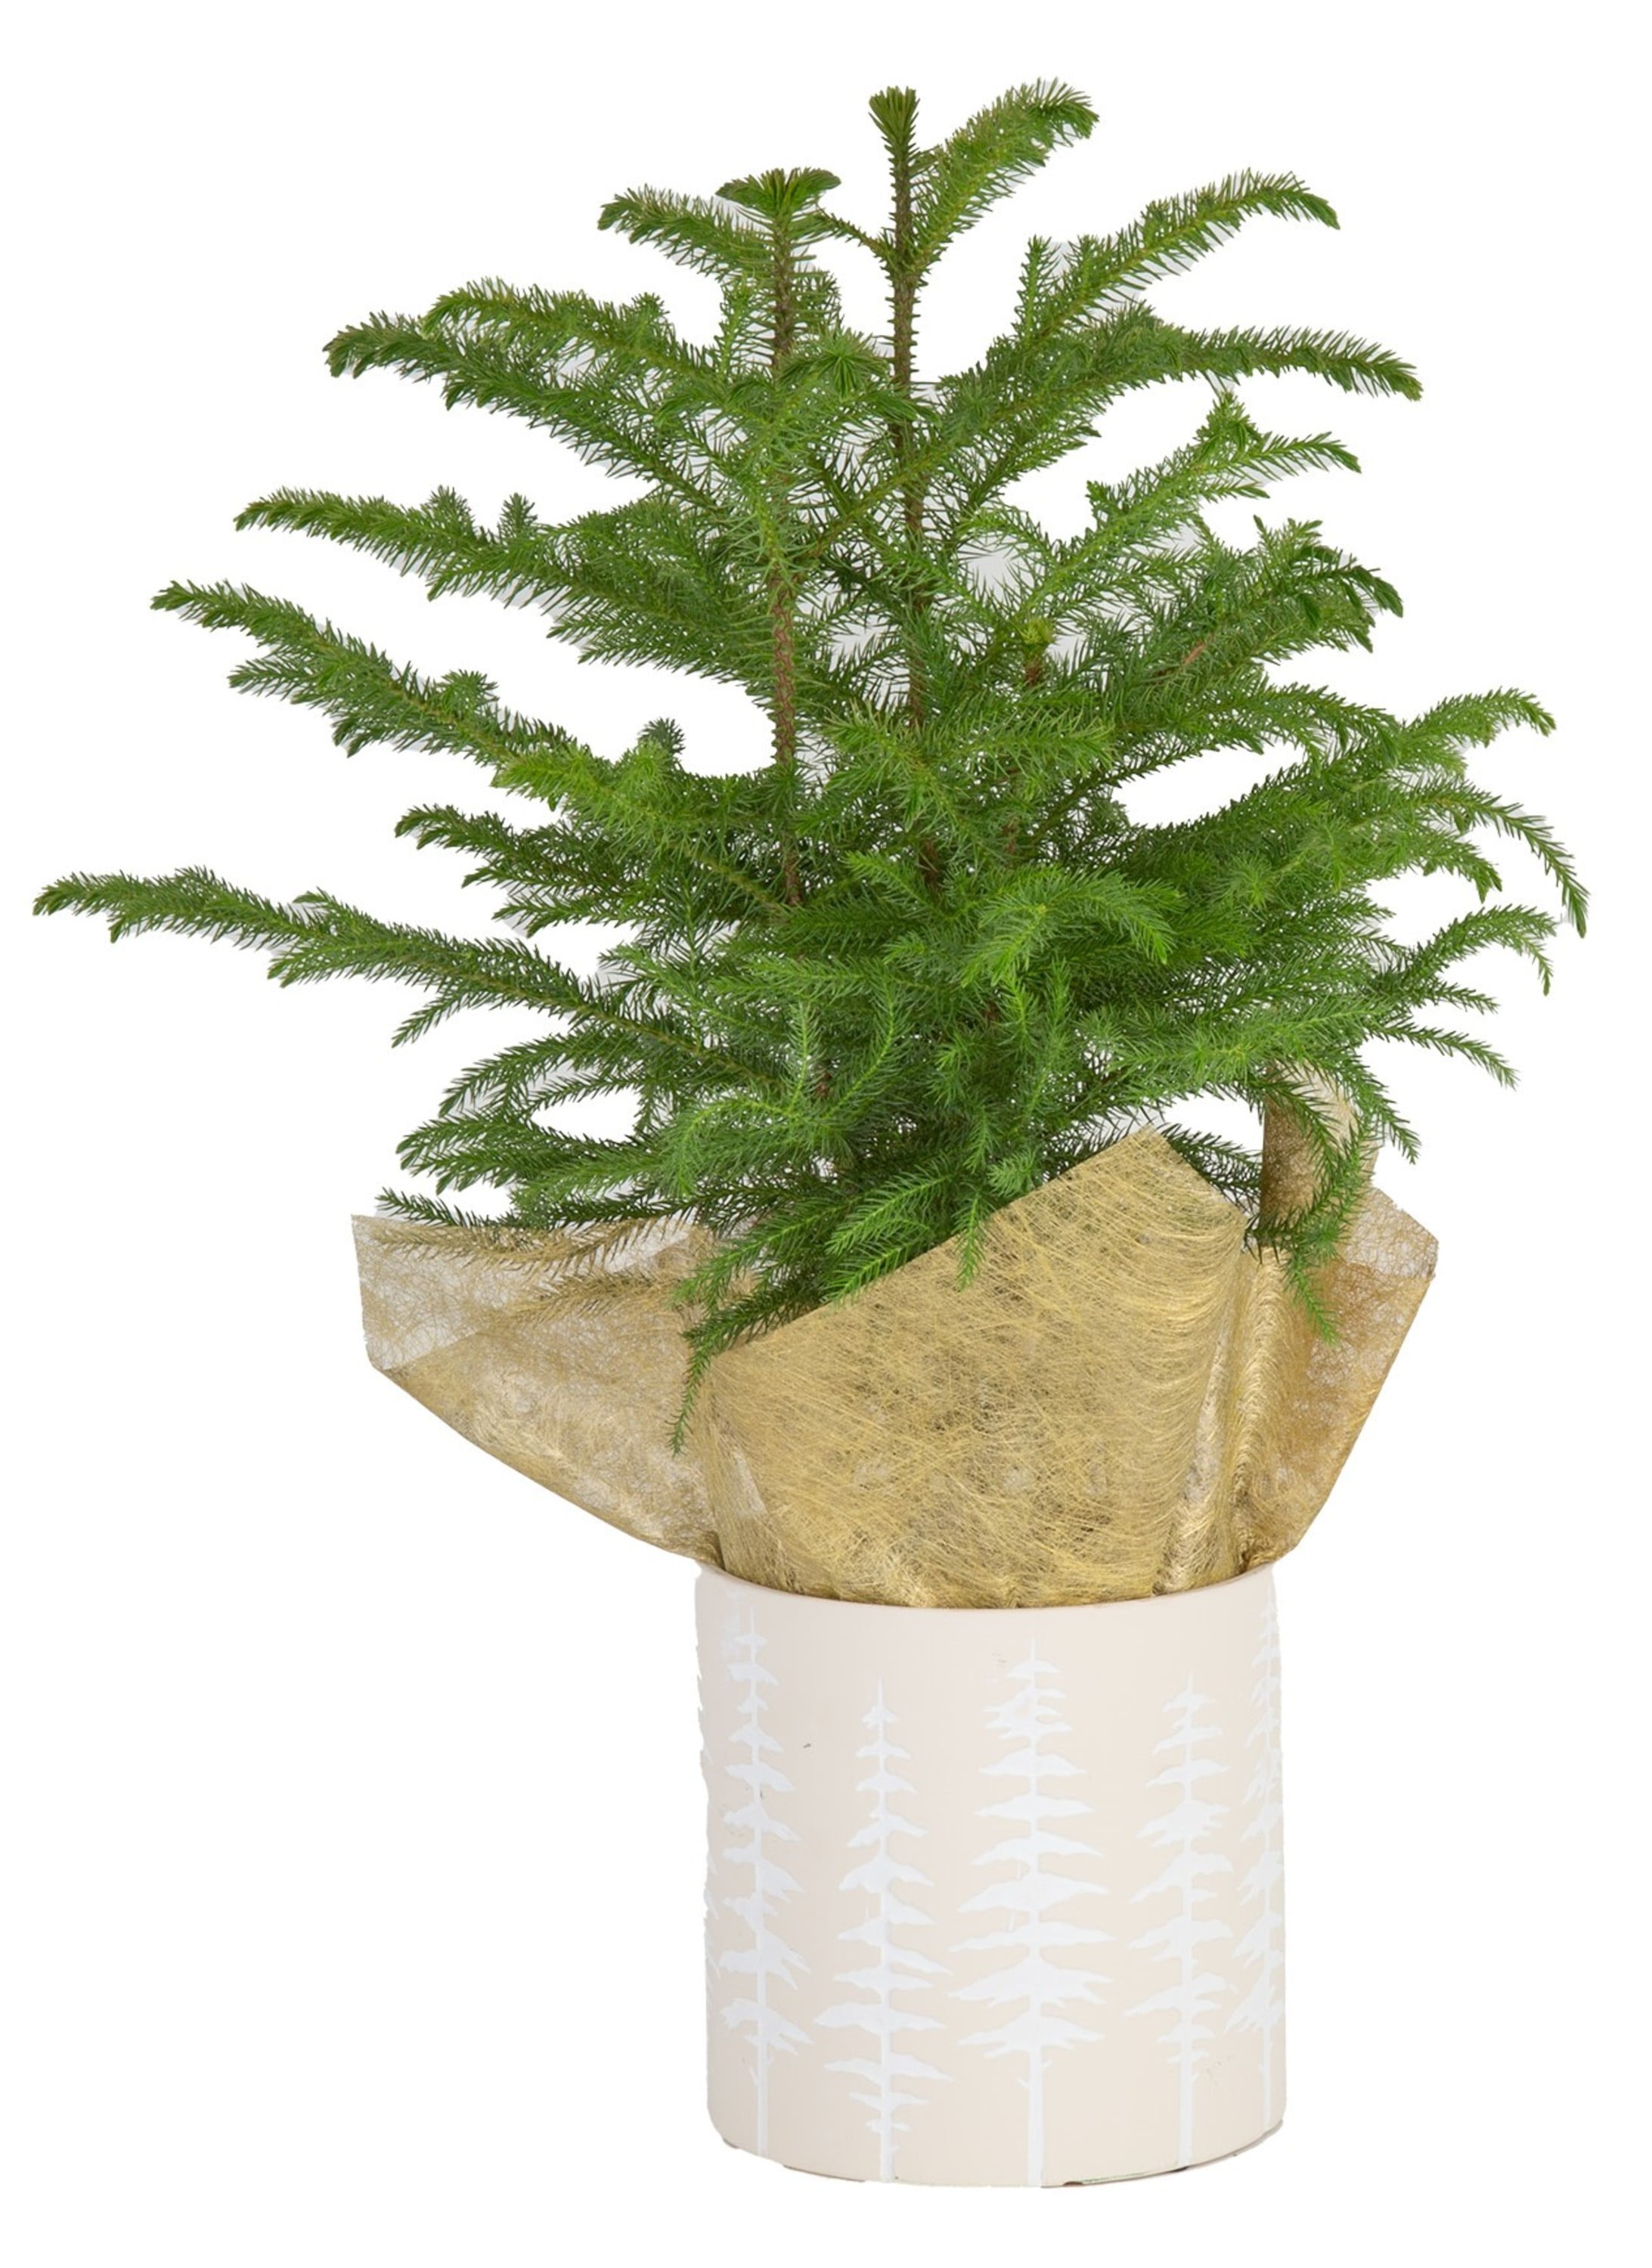 Costa Farms Live Indoor 18in Tall Green Norfolk Island Pine Bright Direct Sunlight Plant In